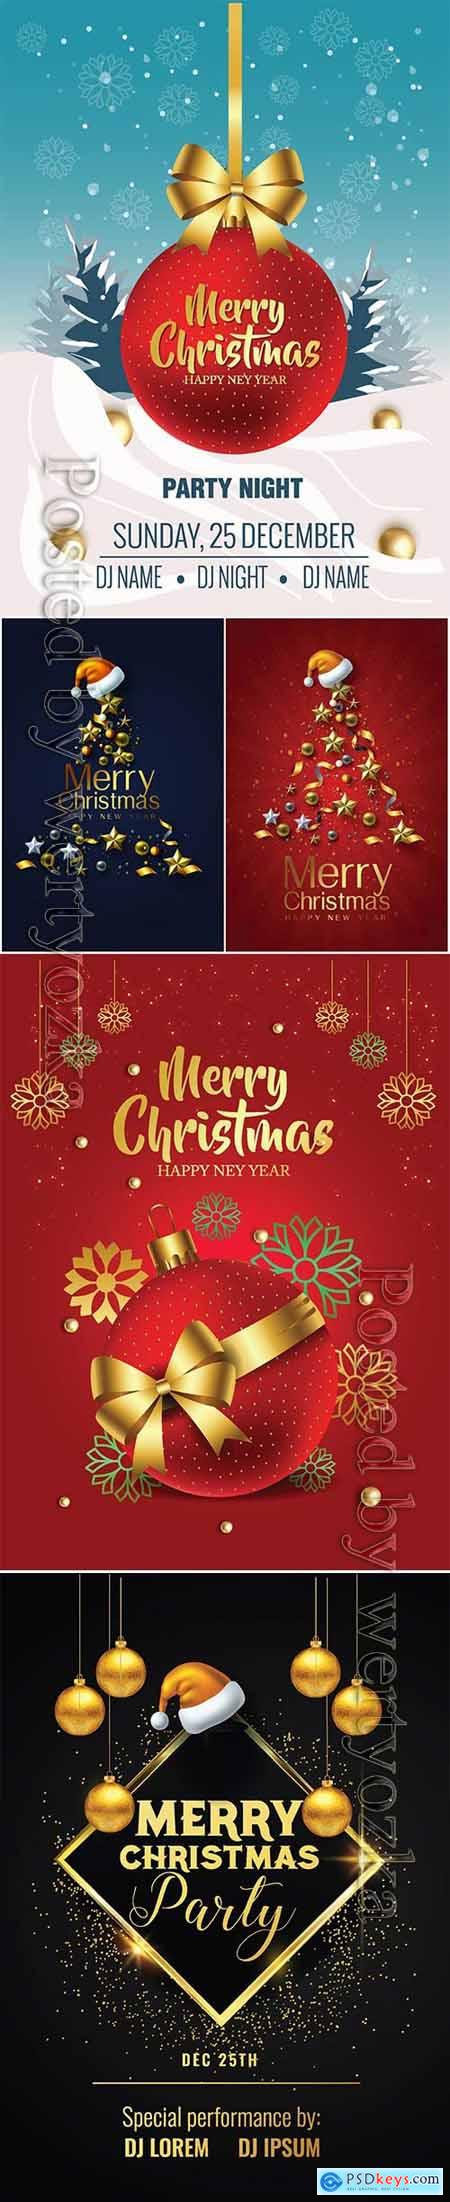 2020 Merry Chistmas and Happy New Year vector illustration v1